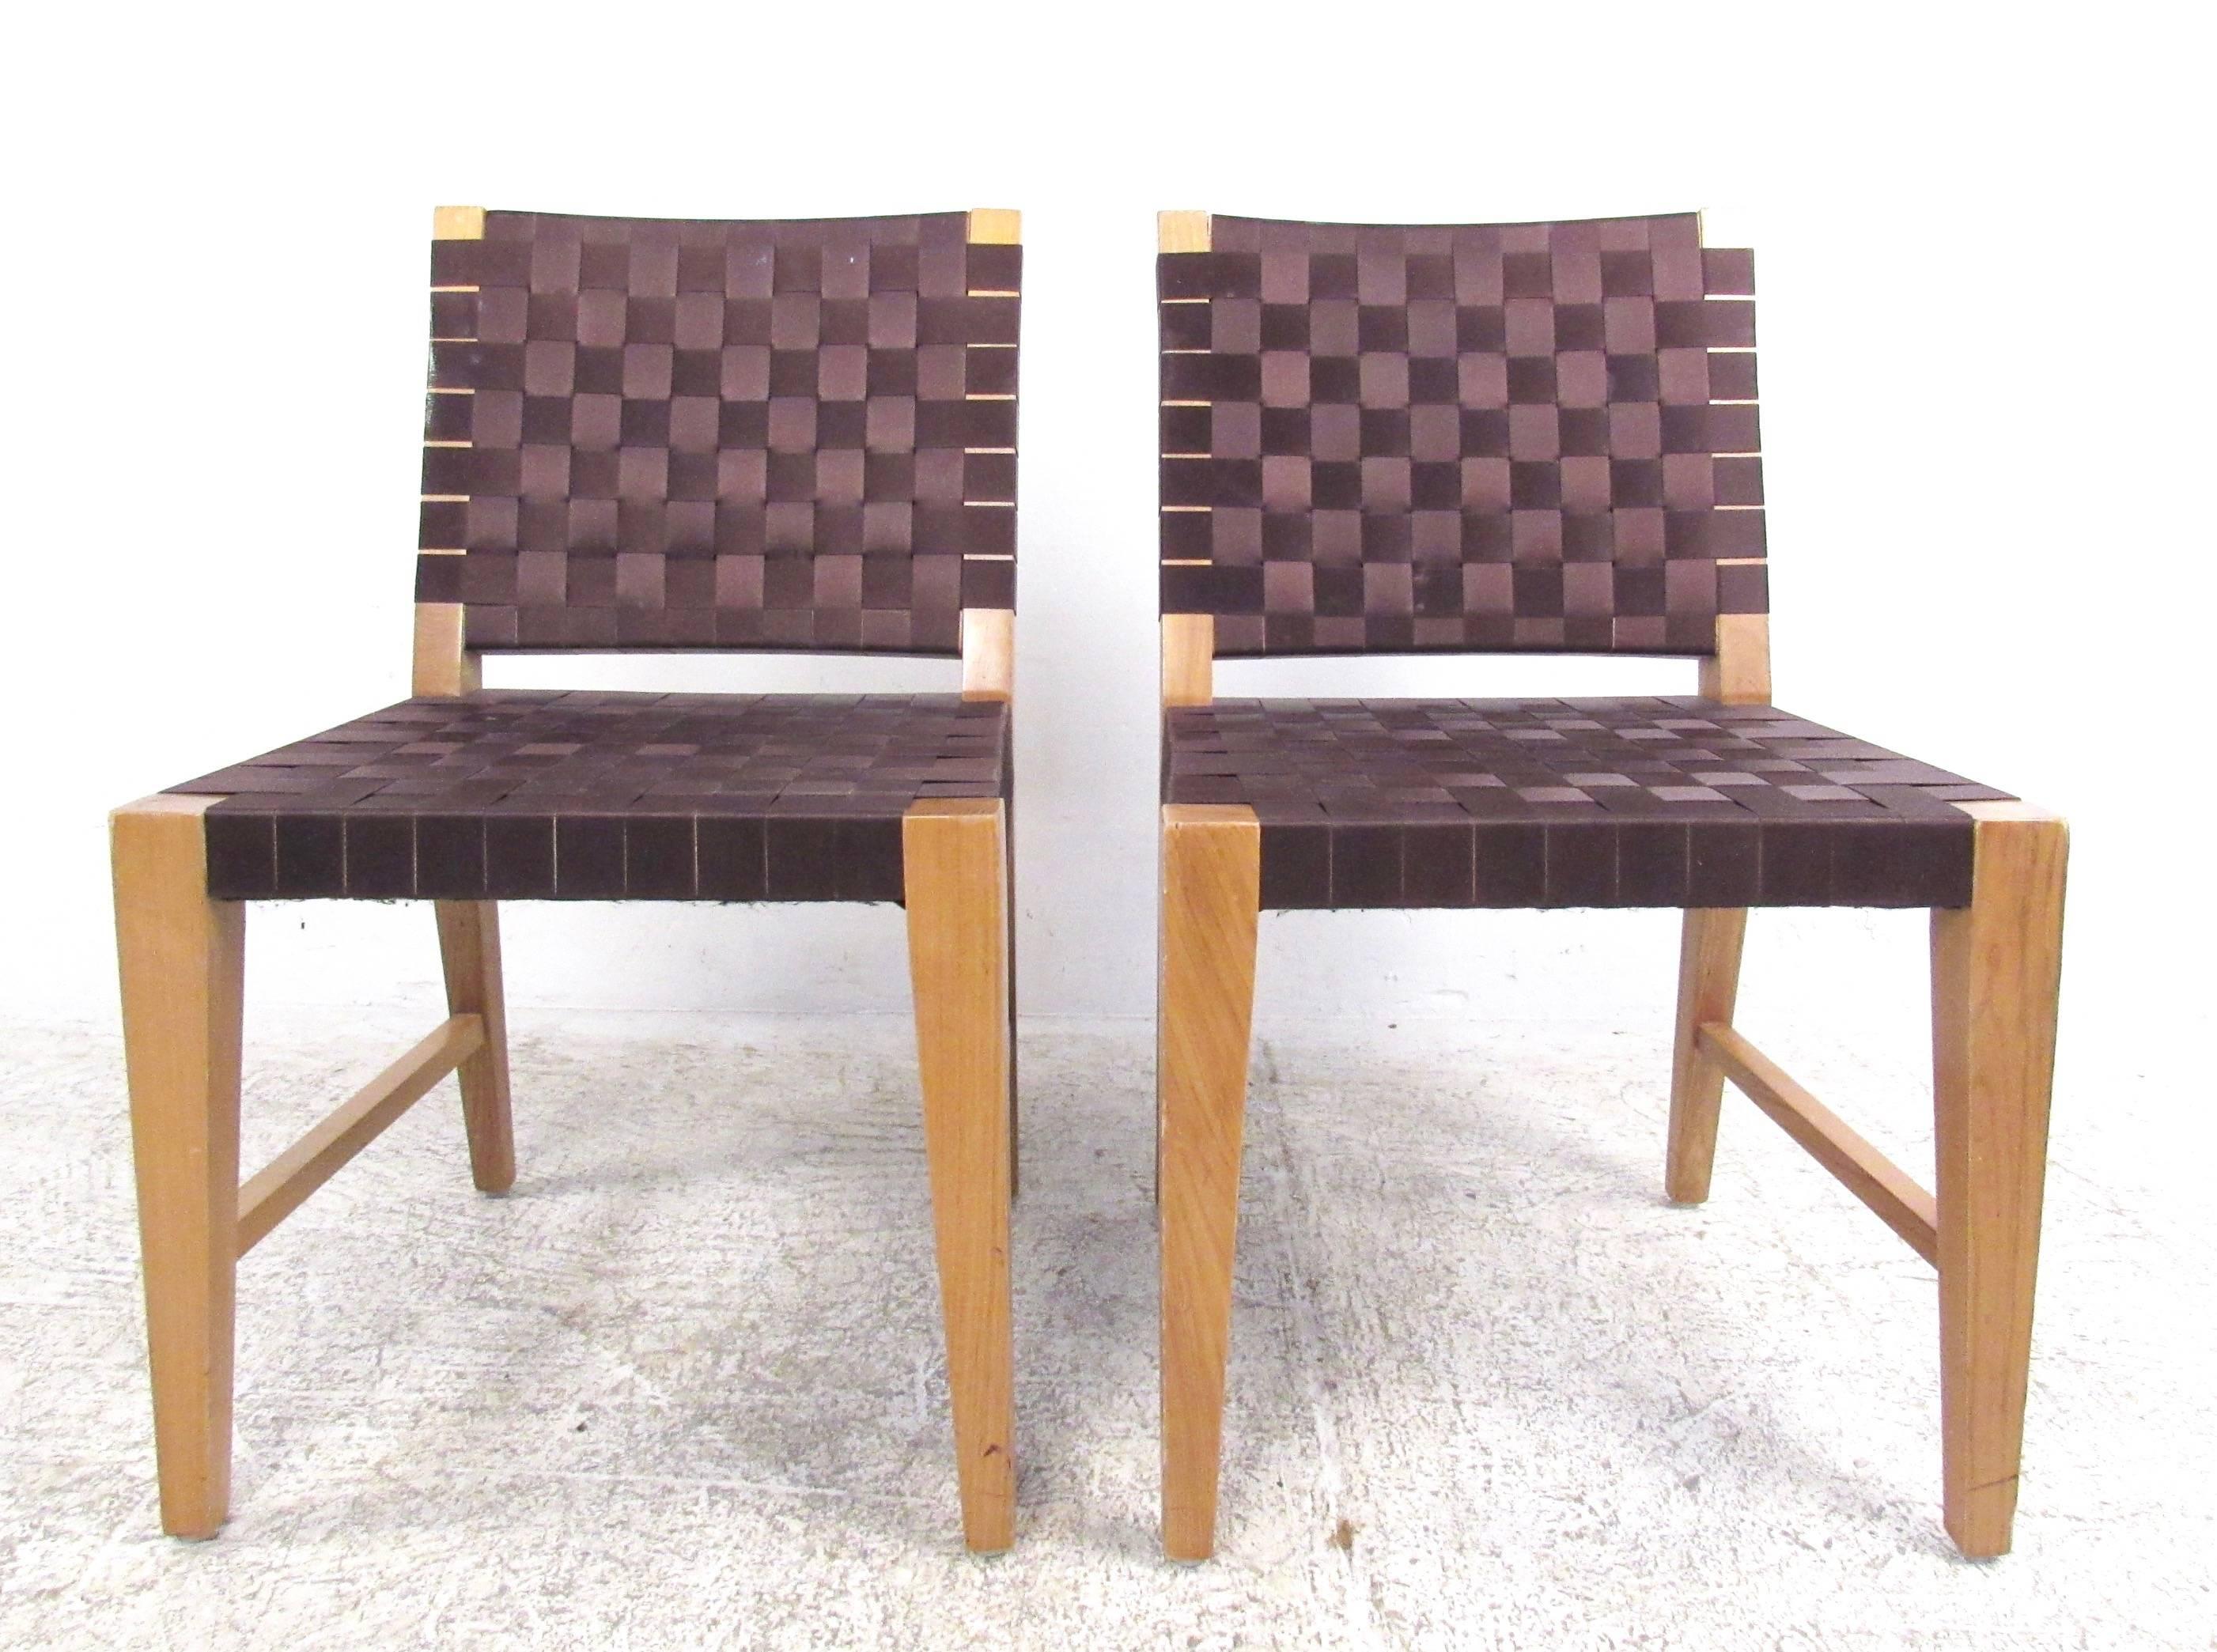 This set of four contemporary side chairs feature the Mid-Century Modern design style of Jens Risom, incorporating woven nylon straps over sturdy hardwood frames. Uniquely angled and tapered legs feature side stretchers for added stability and